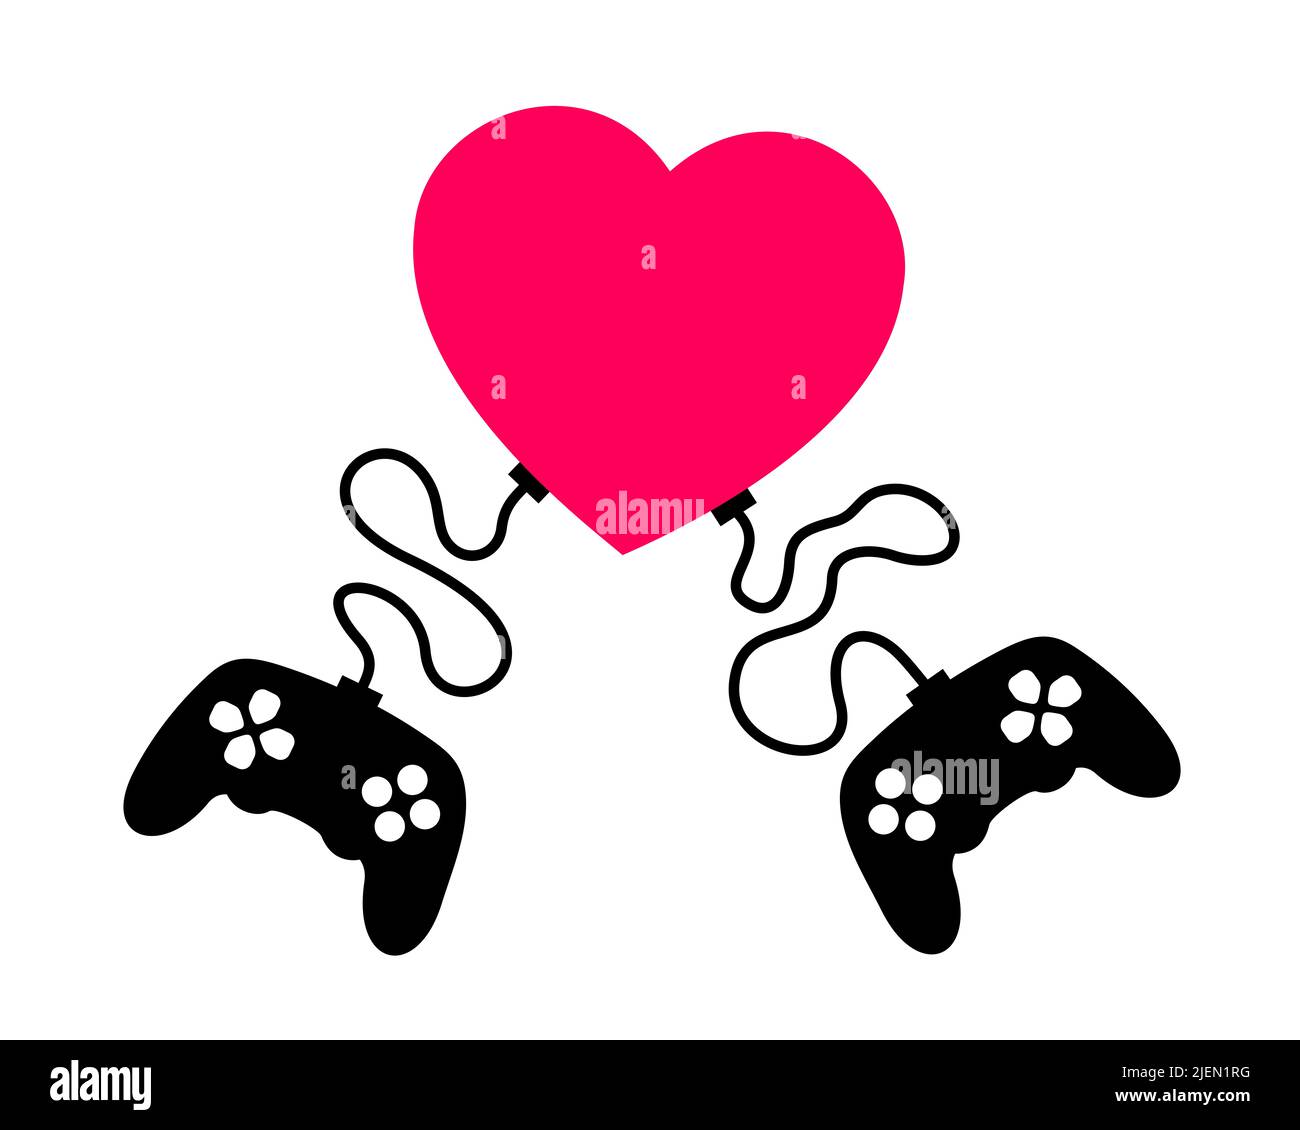 Love game and play - gamepad, joystick and symbol of heart as metaphot of couple playing romantic, emotional and sexual game. Vector illustration isol Stock Photo